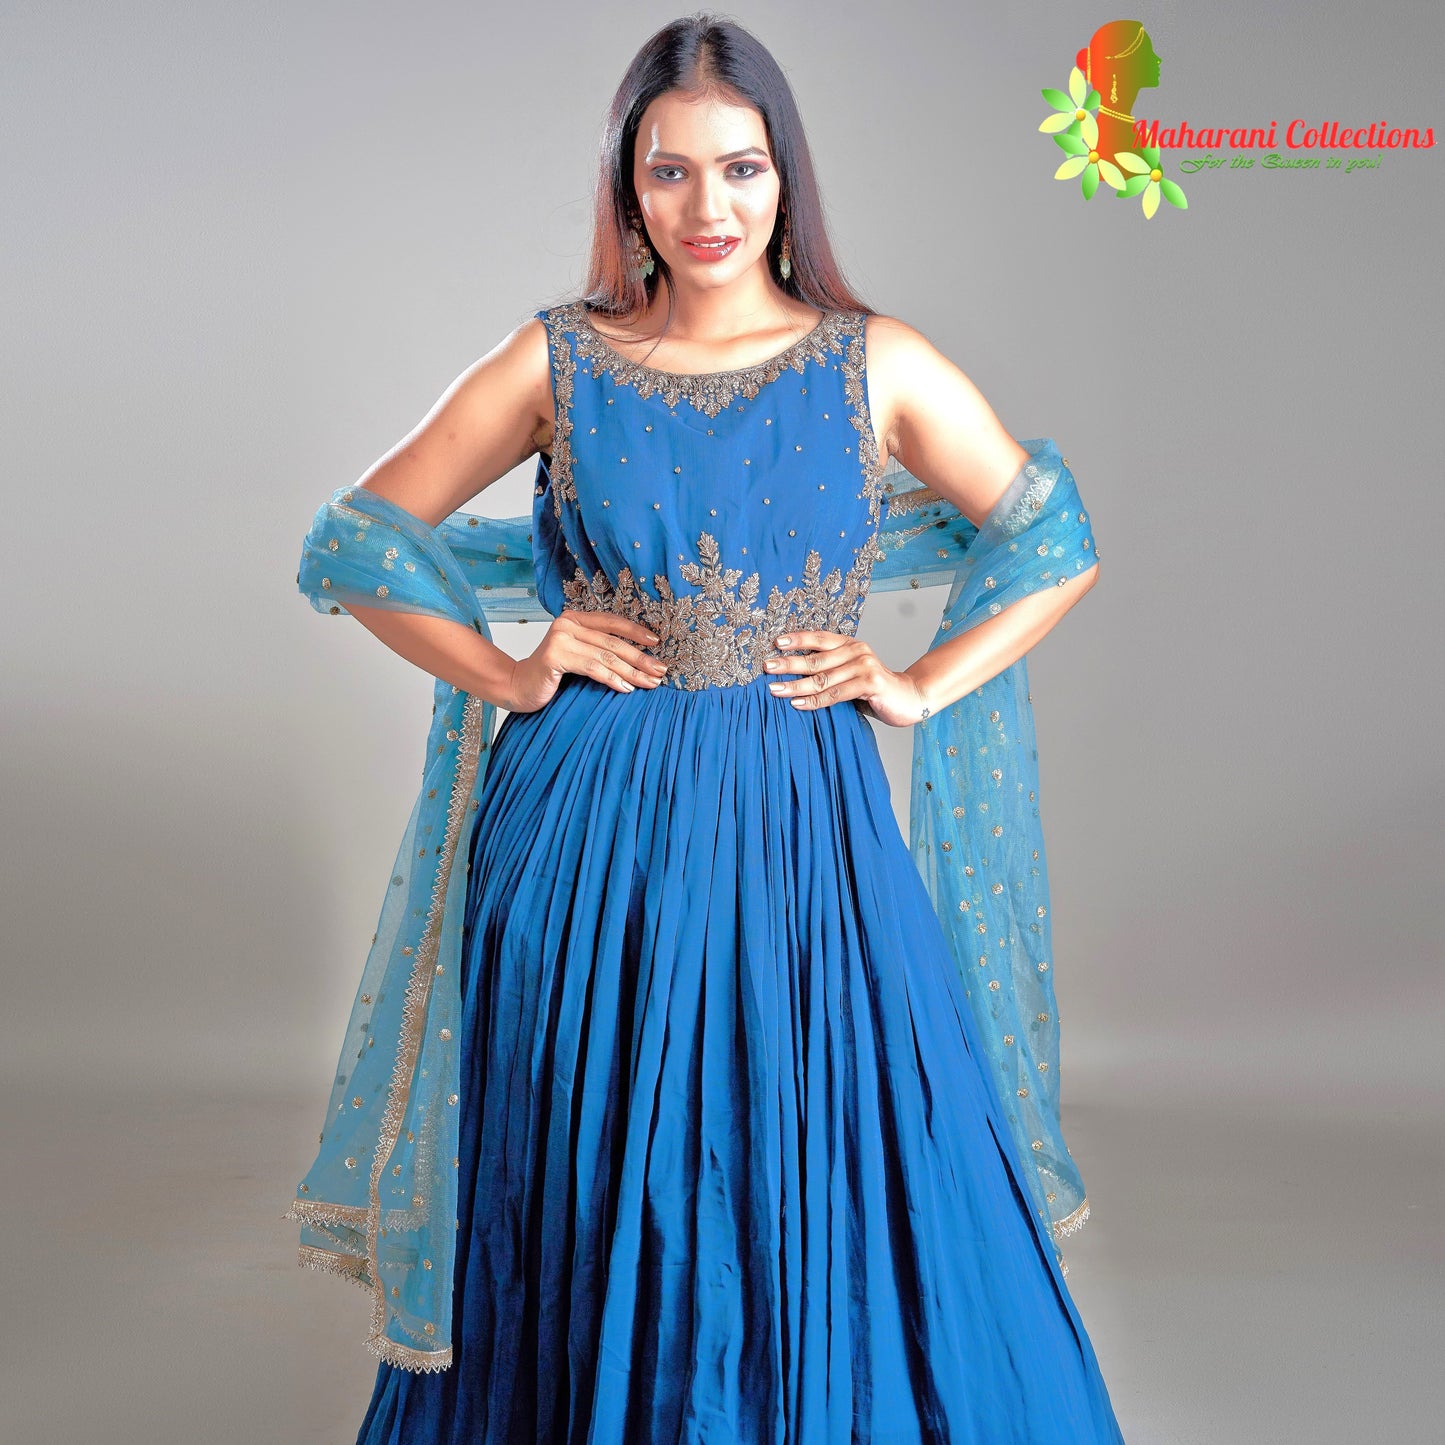 Maharani's Designer Ball (Princess) Gown - Peacock Blue with Heavy Golden Sequins and Zari Work